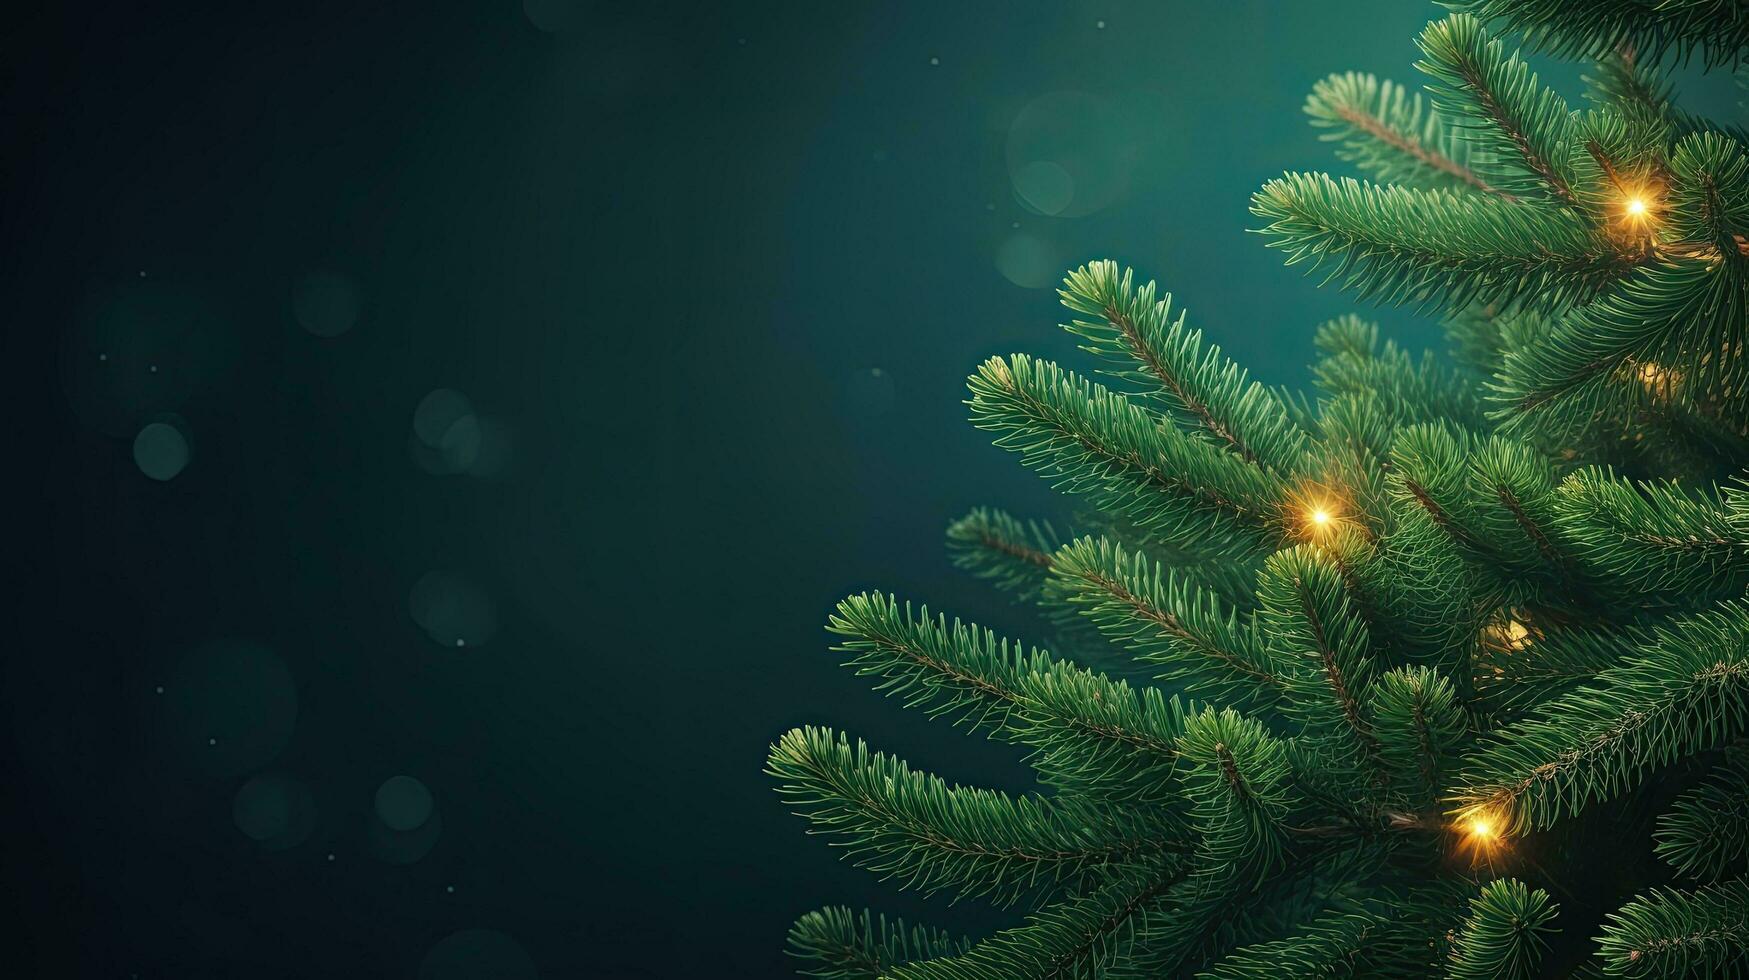 Christmas green background with fir branches photo